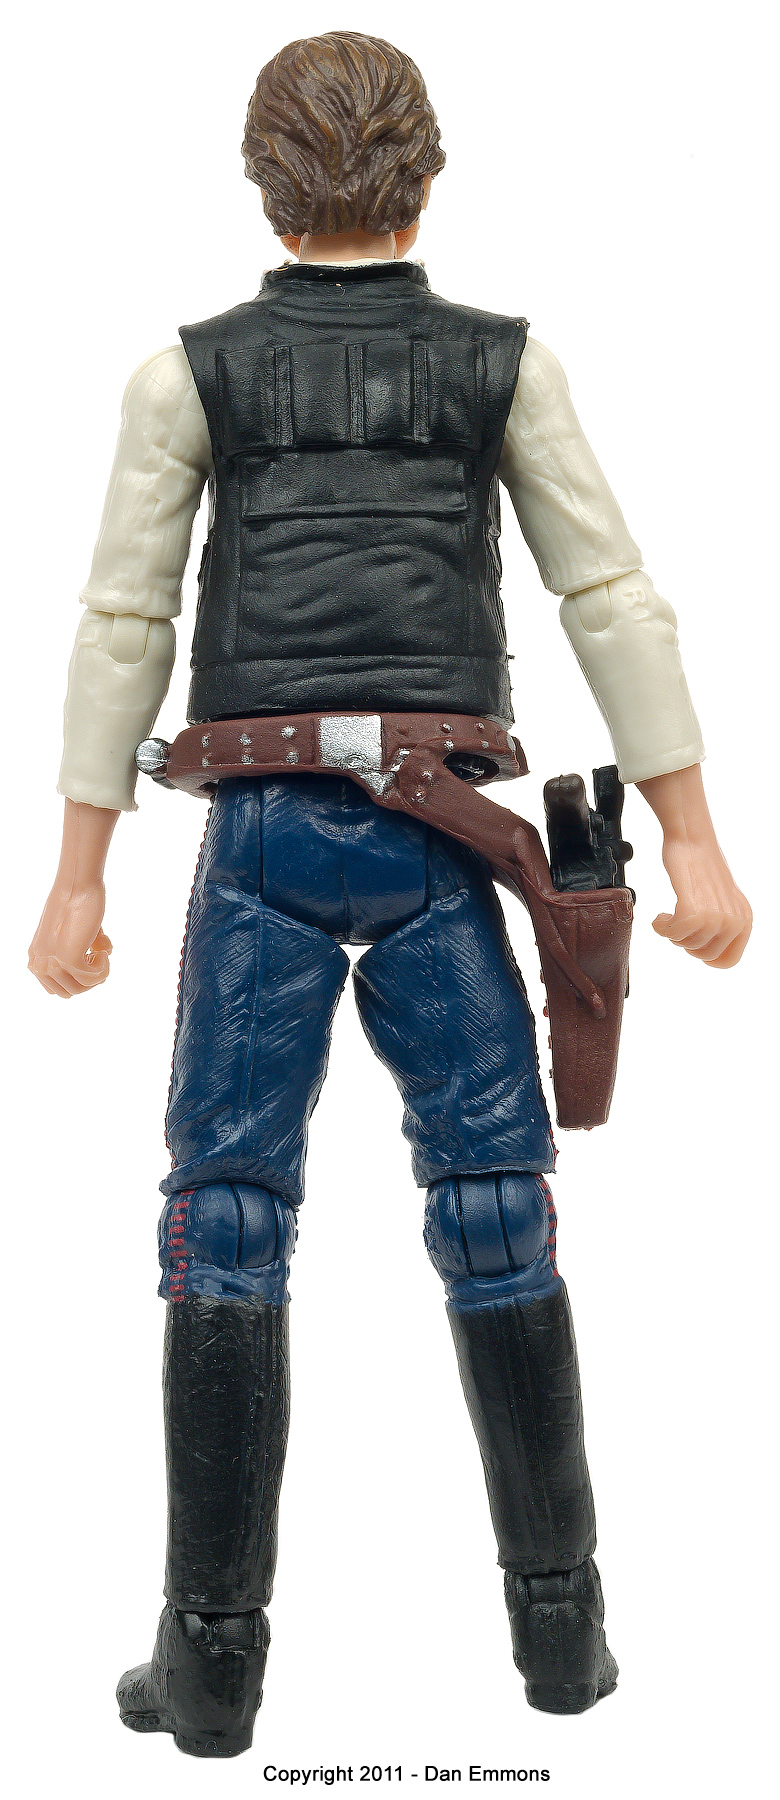 The Vintage Collection - VC42: Han Solo (Yavin Ceremony)